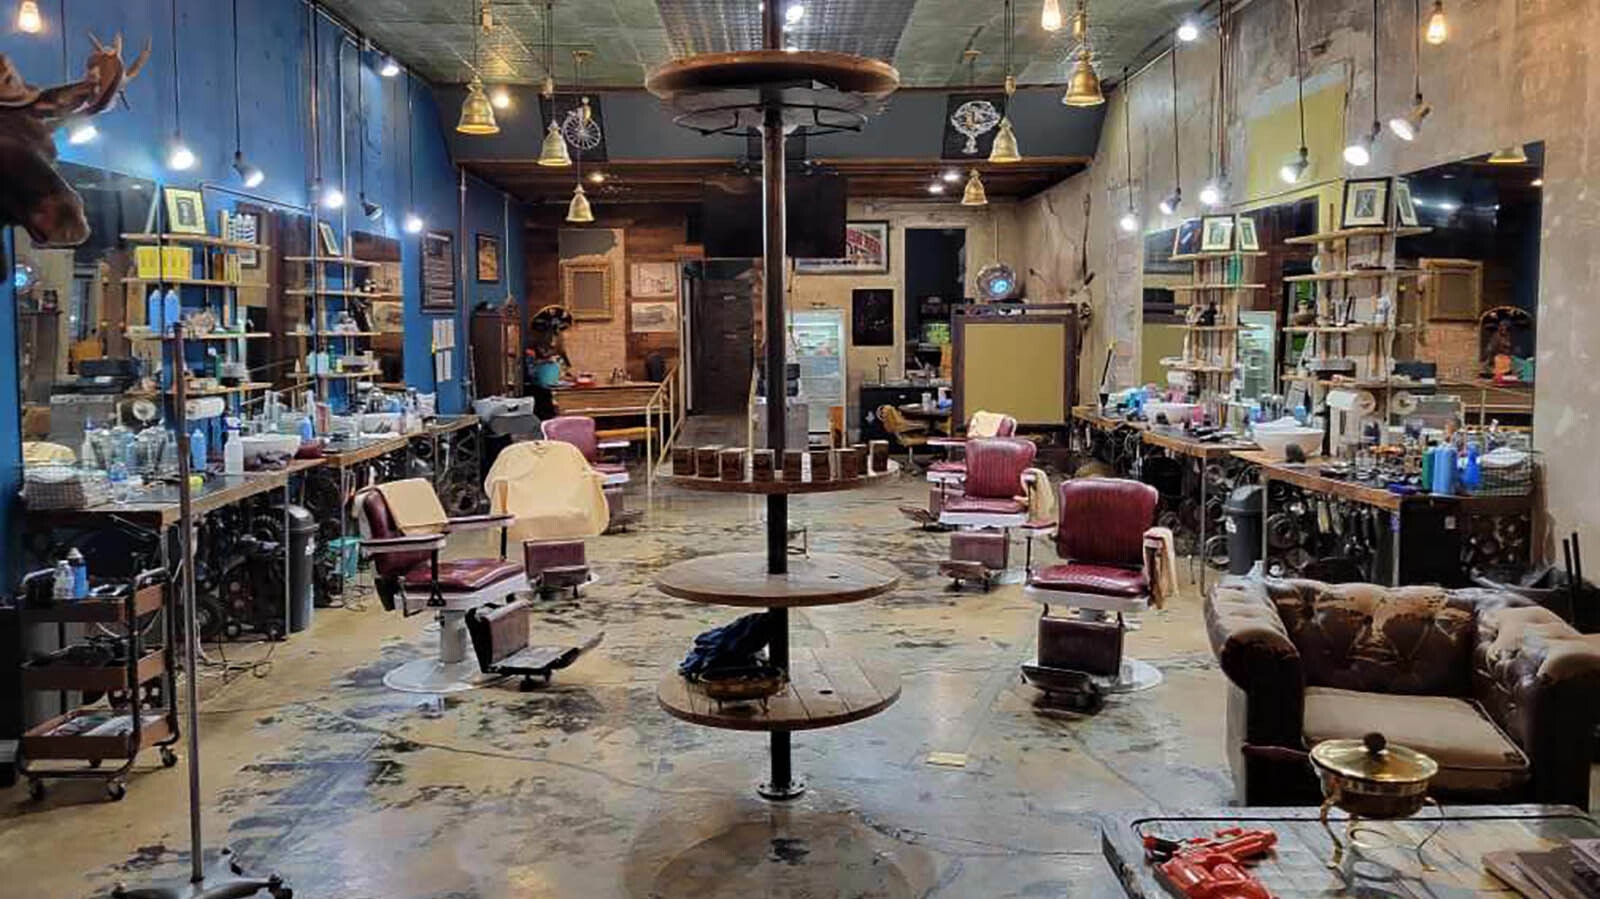 Rapscallions Barbershop is packed with and eclectic collection provided by customers.